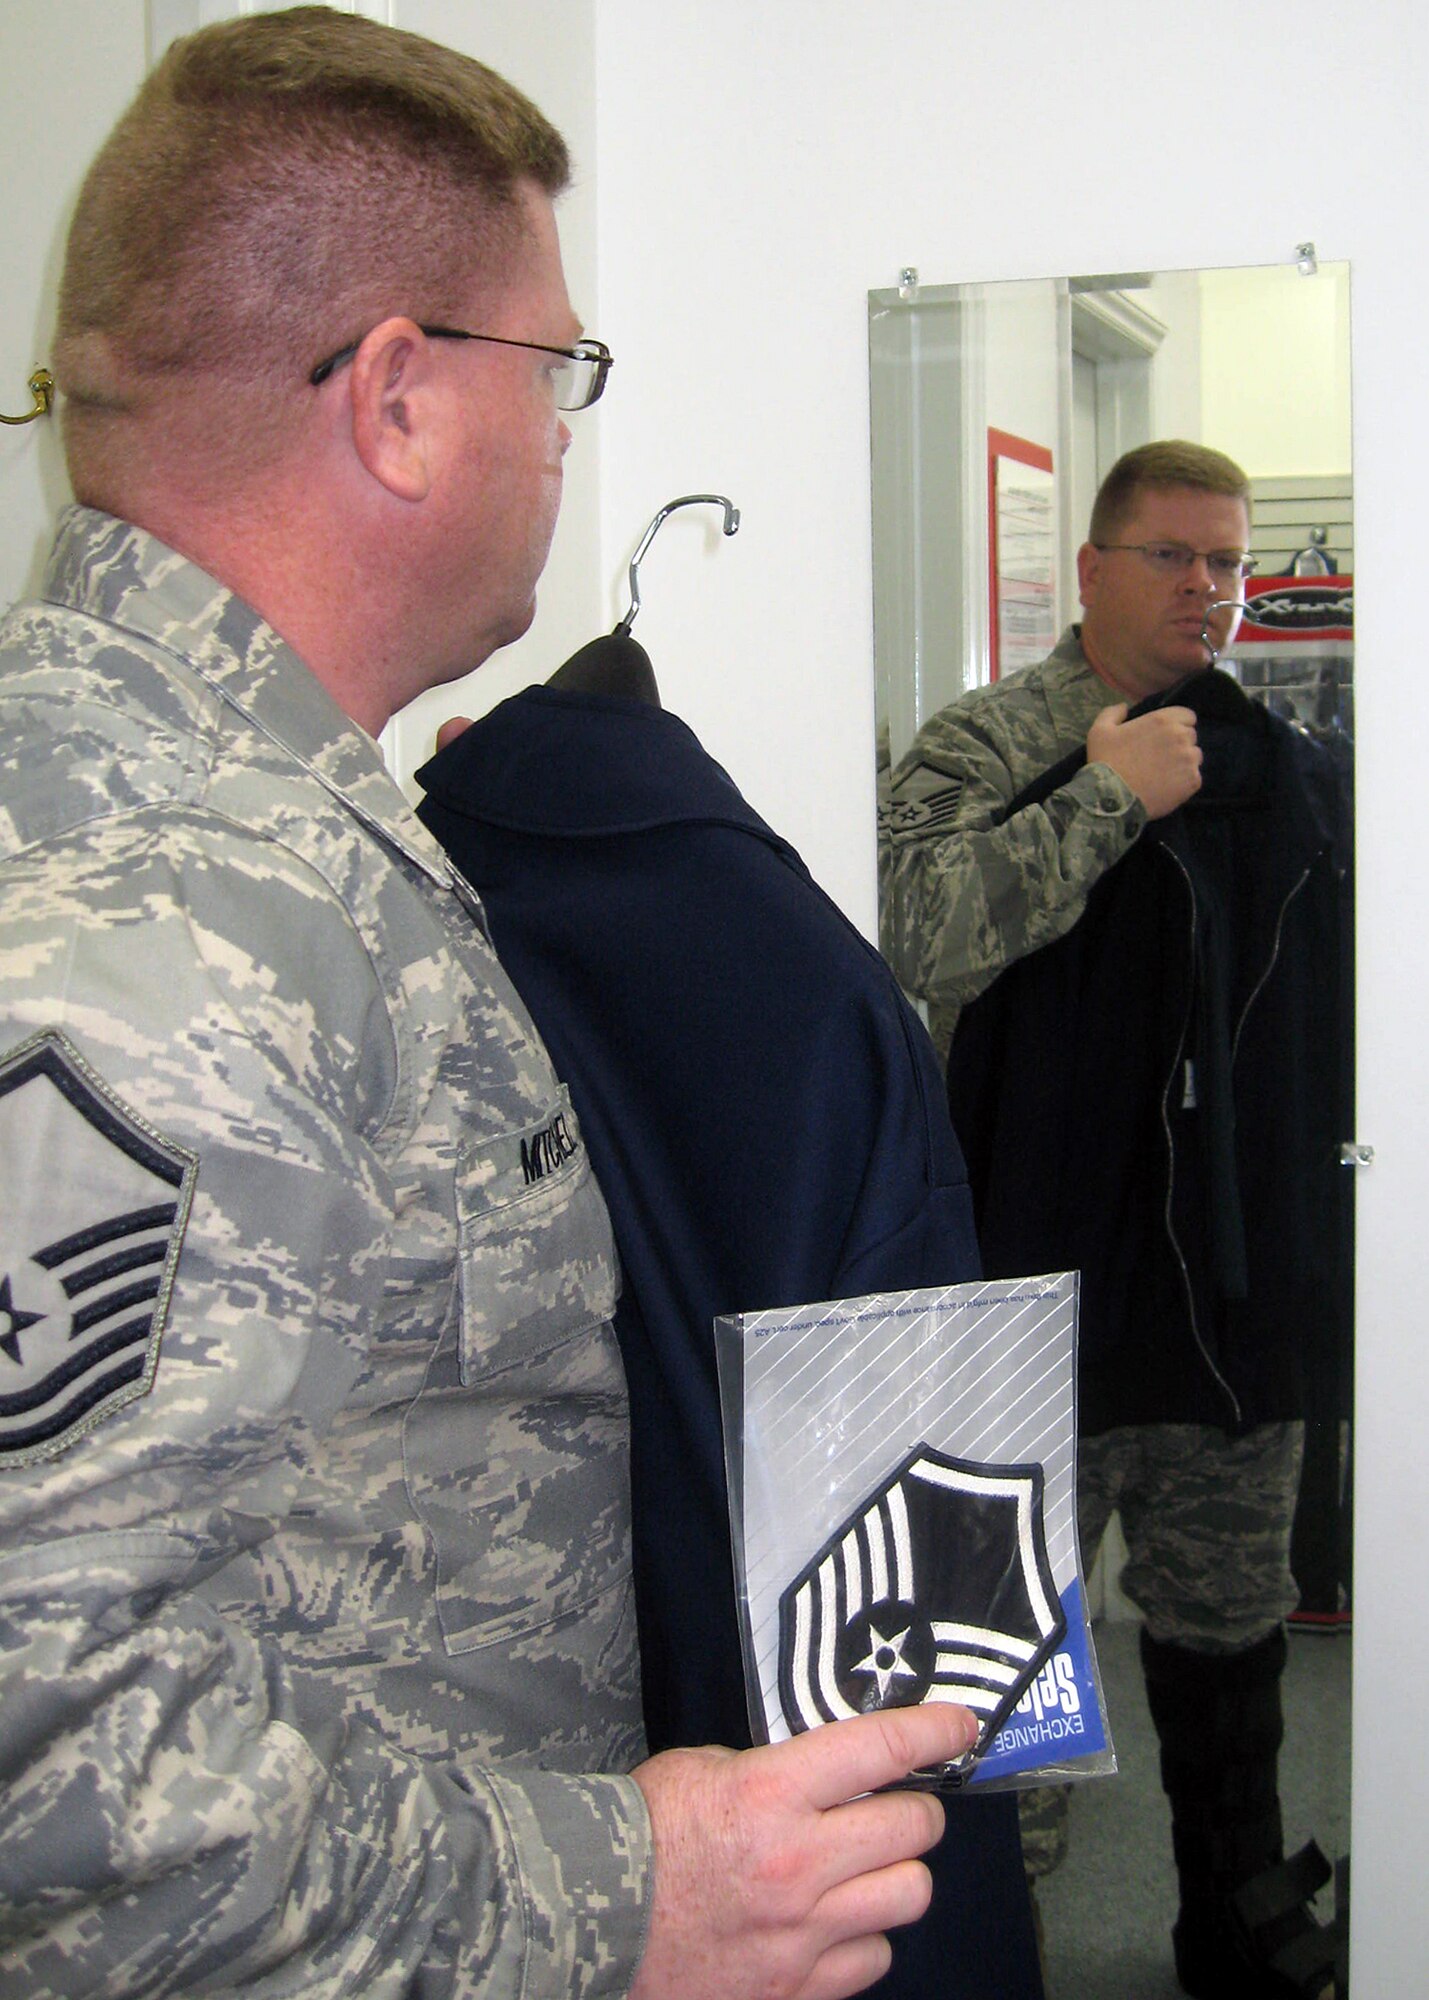 Master Sgt. Don Mitchell, 4th Equipment Maintenance Squadron assistant maintenance flight chief, checks the length of a light-weight jacket in the mirror at the Army and Air Force Exchange Military Clothing Sales Store Oct. 13, 2009. Enlisted Airmen must have chevron rank insignias sewn-on their light-weight jacket by effective Jan. 1, 2010. (U.S. Air Force photo/Tech. Sgt. Tammie Moore)